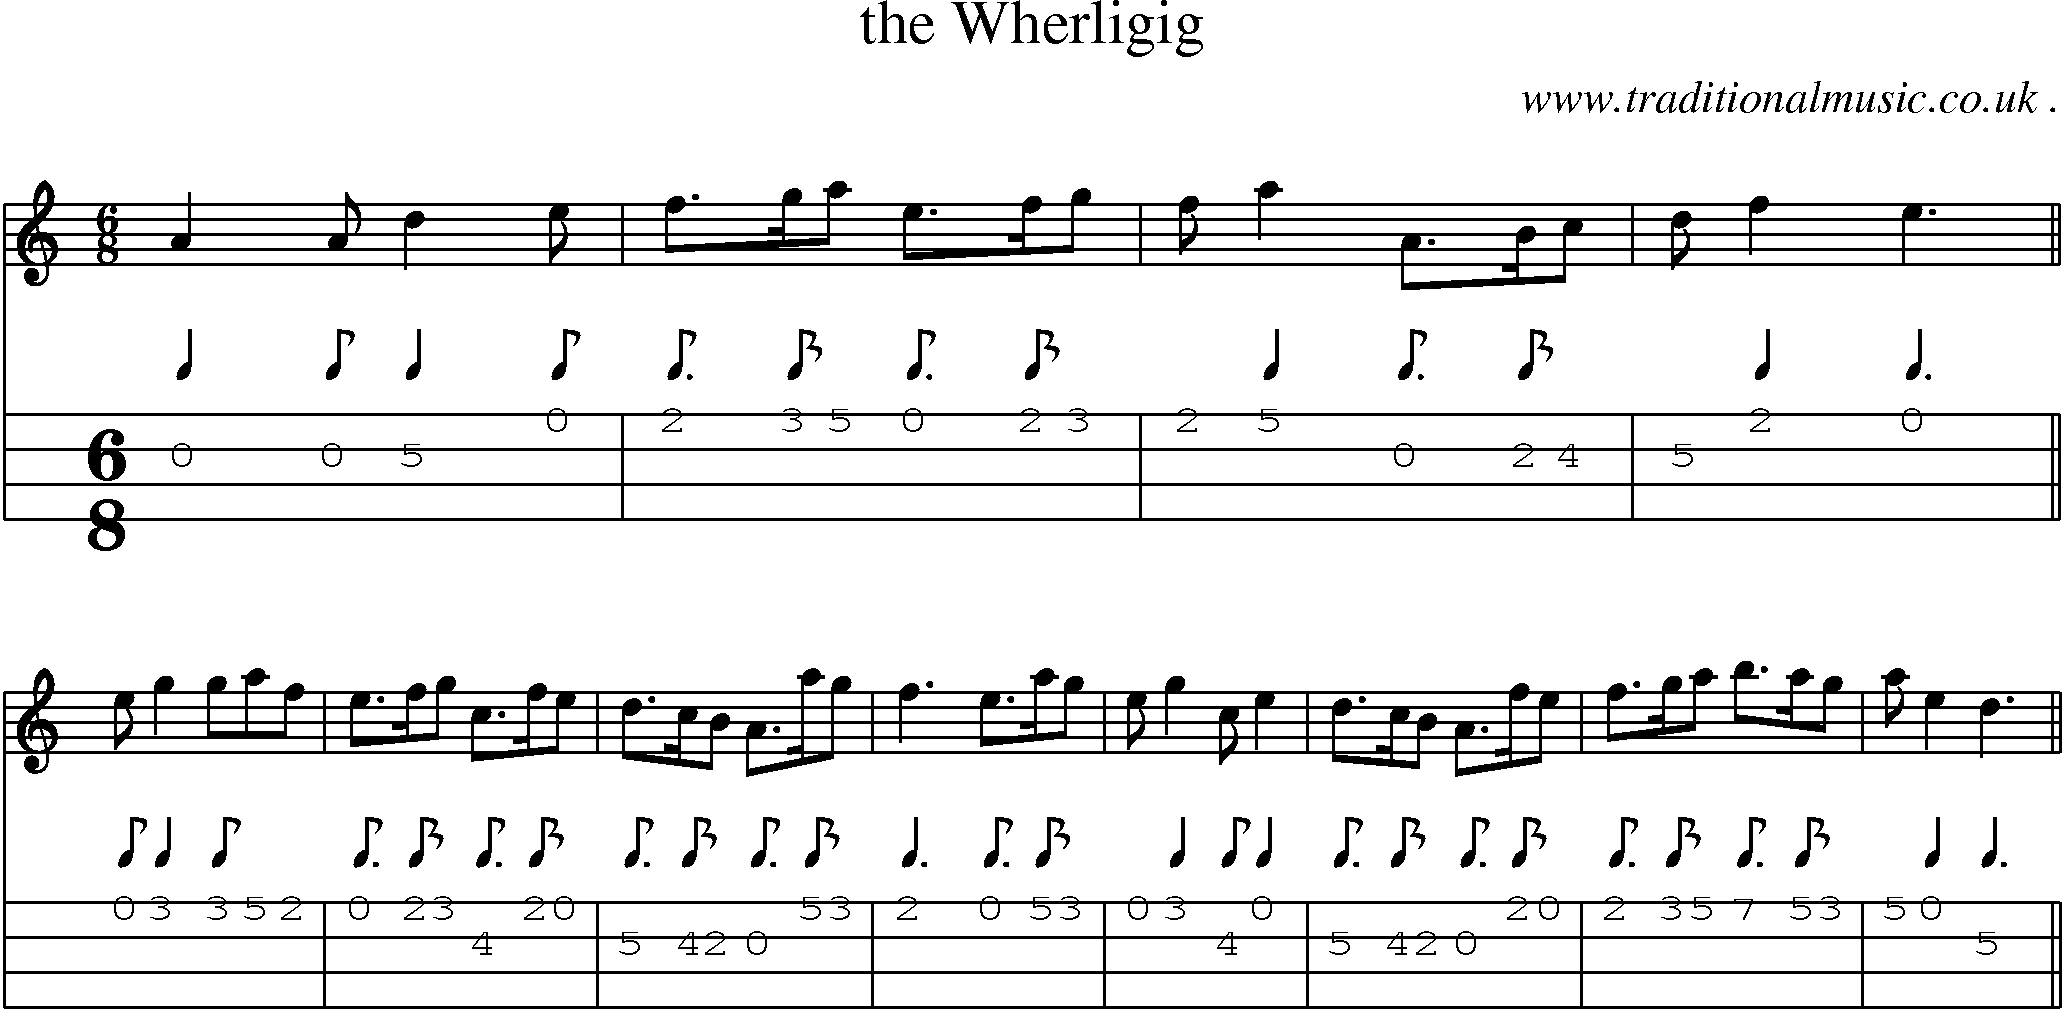 Sheet-music  score, Chords and Mandolin Tabs for The Wherligig